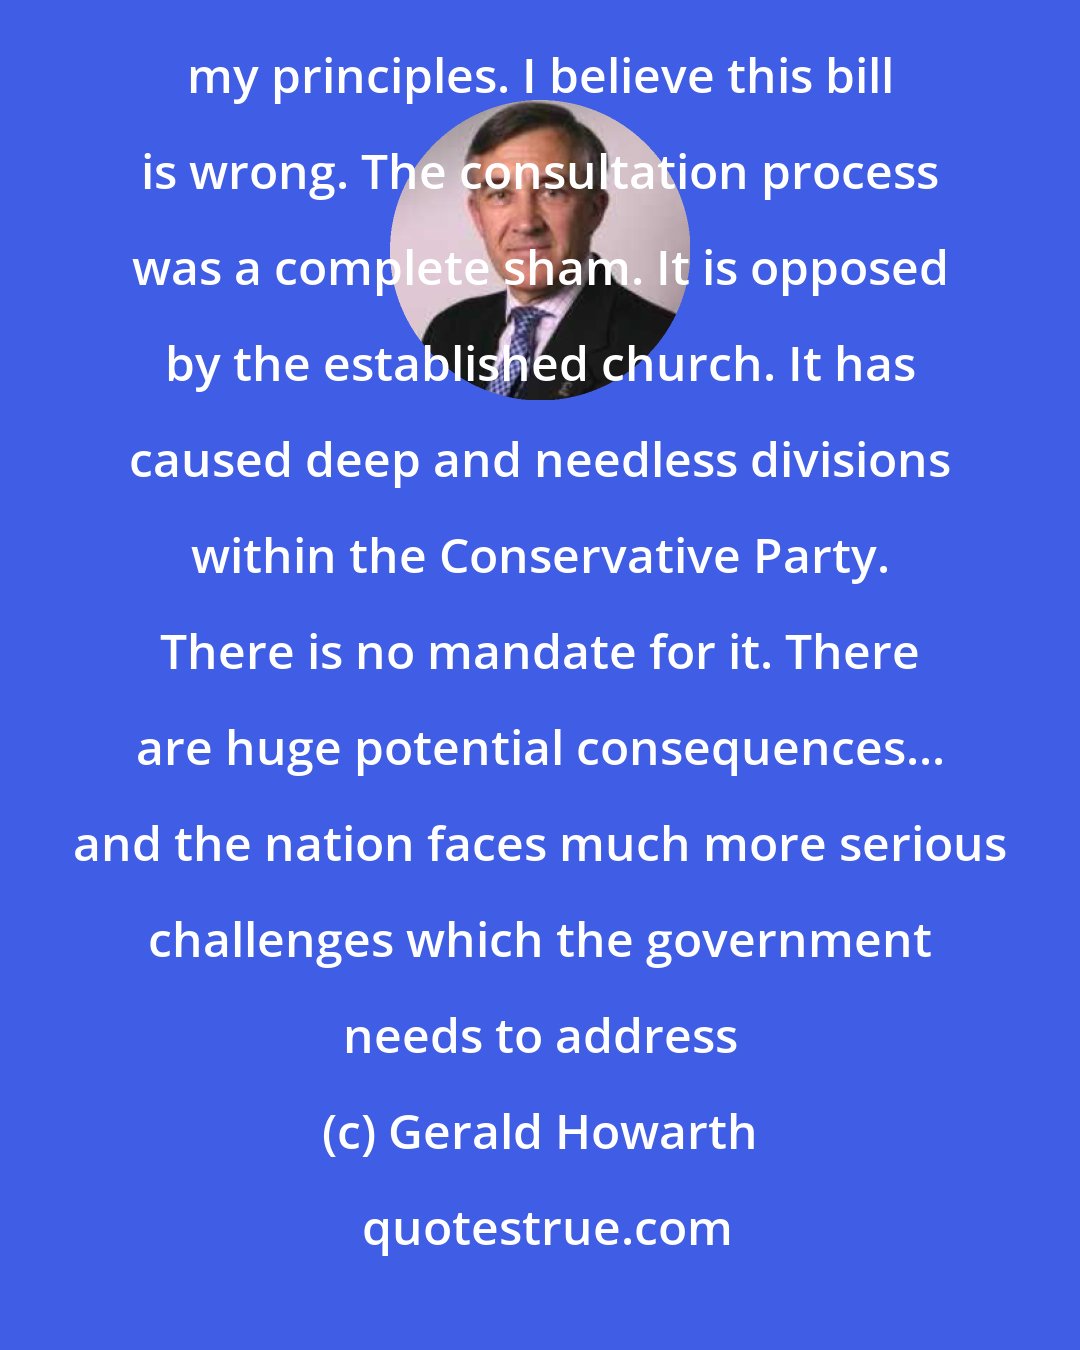 Gerald Howarth: I am not a Tory moderniser for I believe marriage can only be between a man and a woman. I shall not surrender my principles. I believe this bill is wrong. The consultation process was a complete sham. It is opposed by the established church. It has caused deep and needless divisions within the Conservative Party. There is no mandate for it. There are huge potential consequences... and the nation faces much more serious challenges which the government needs to address